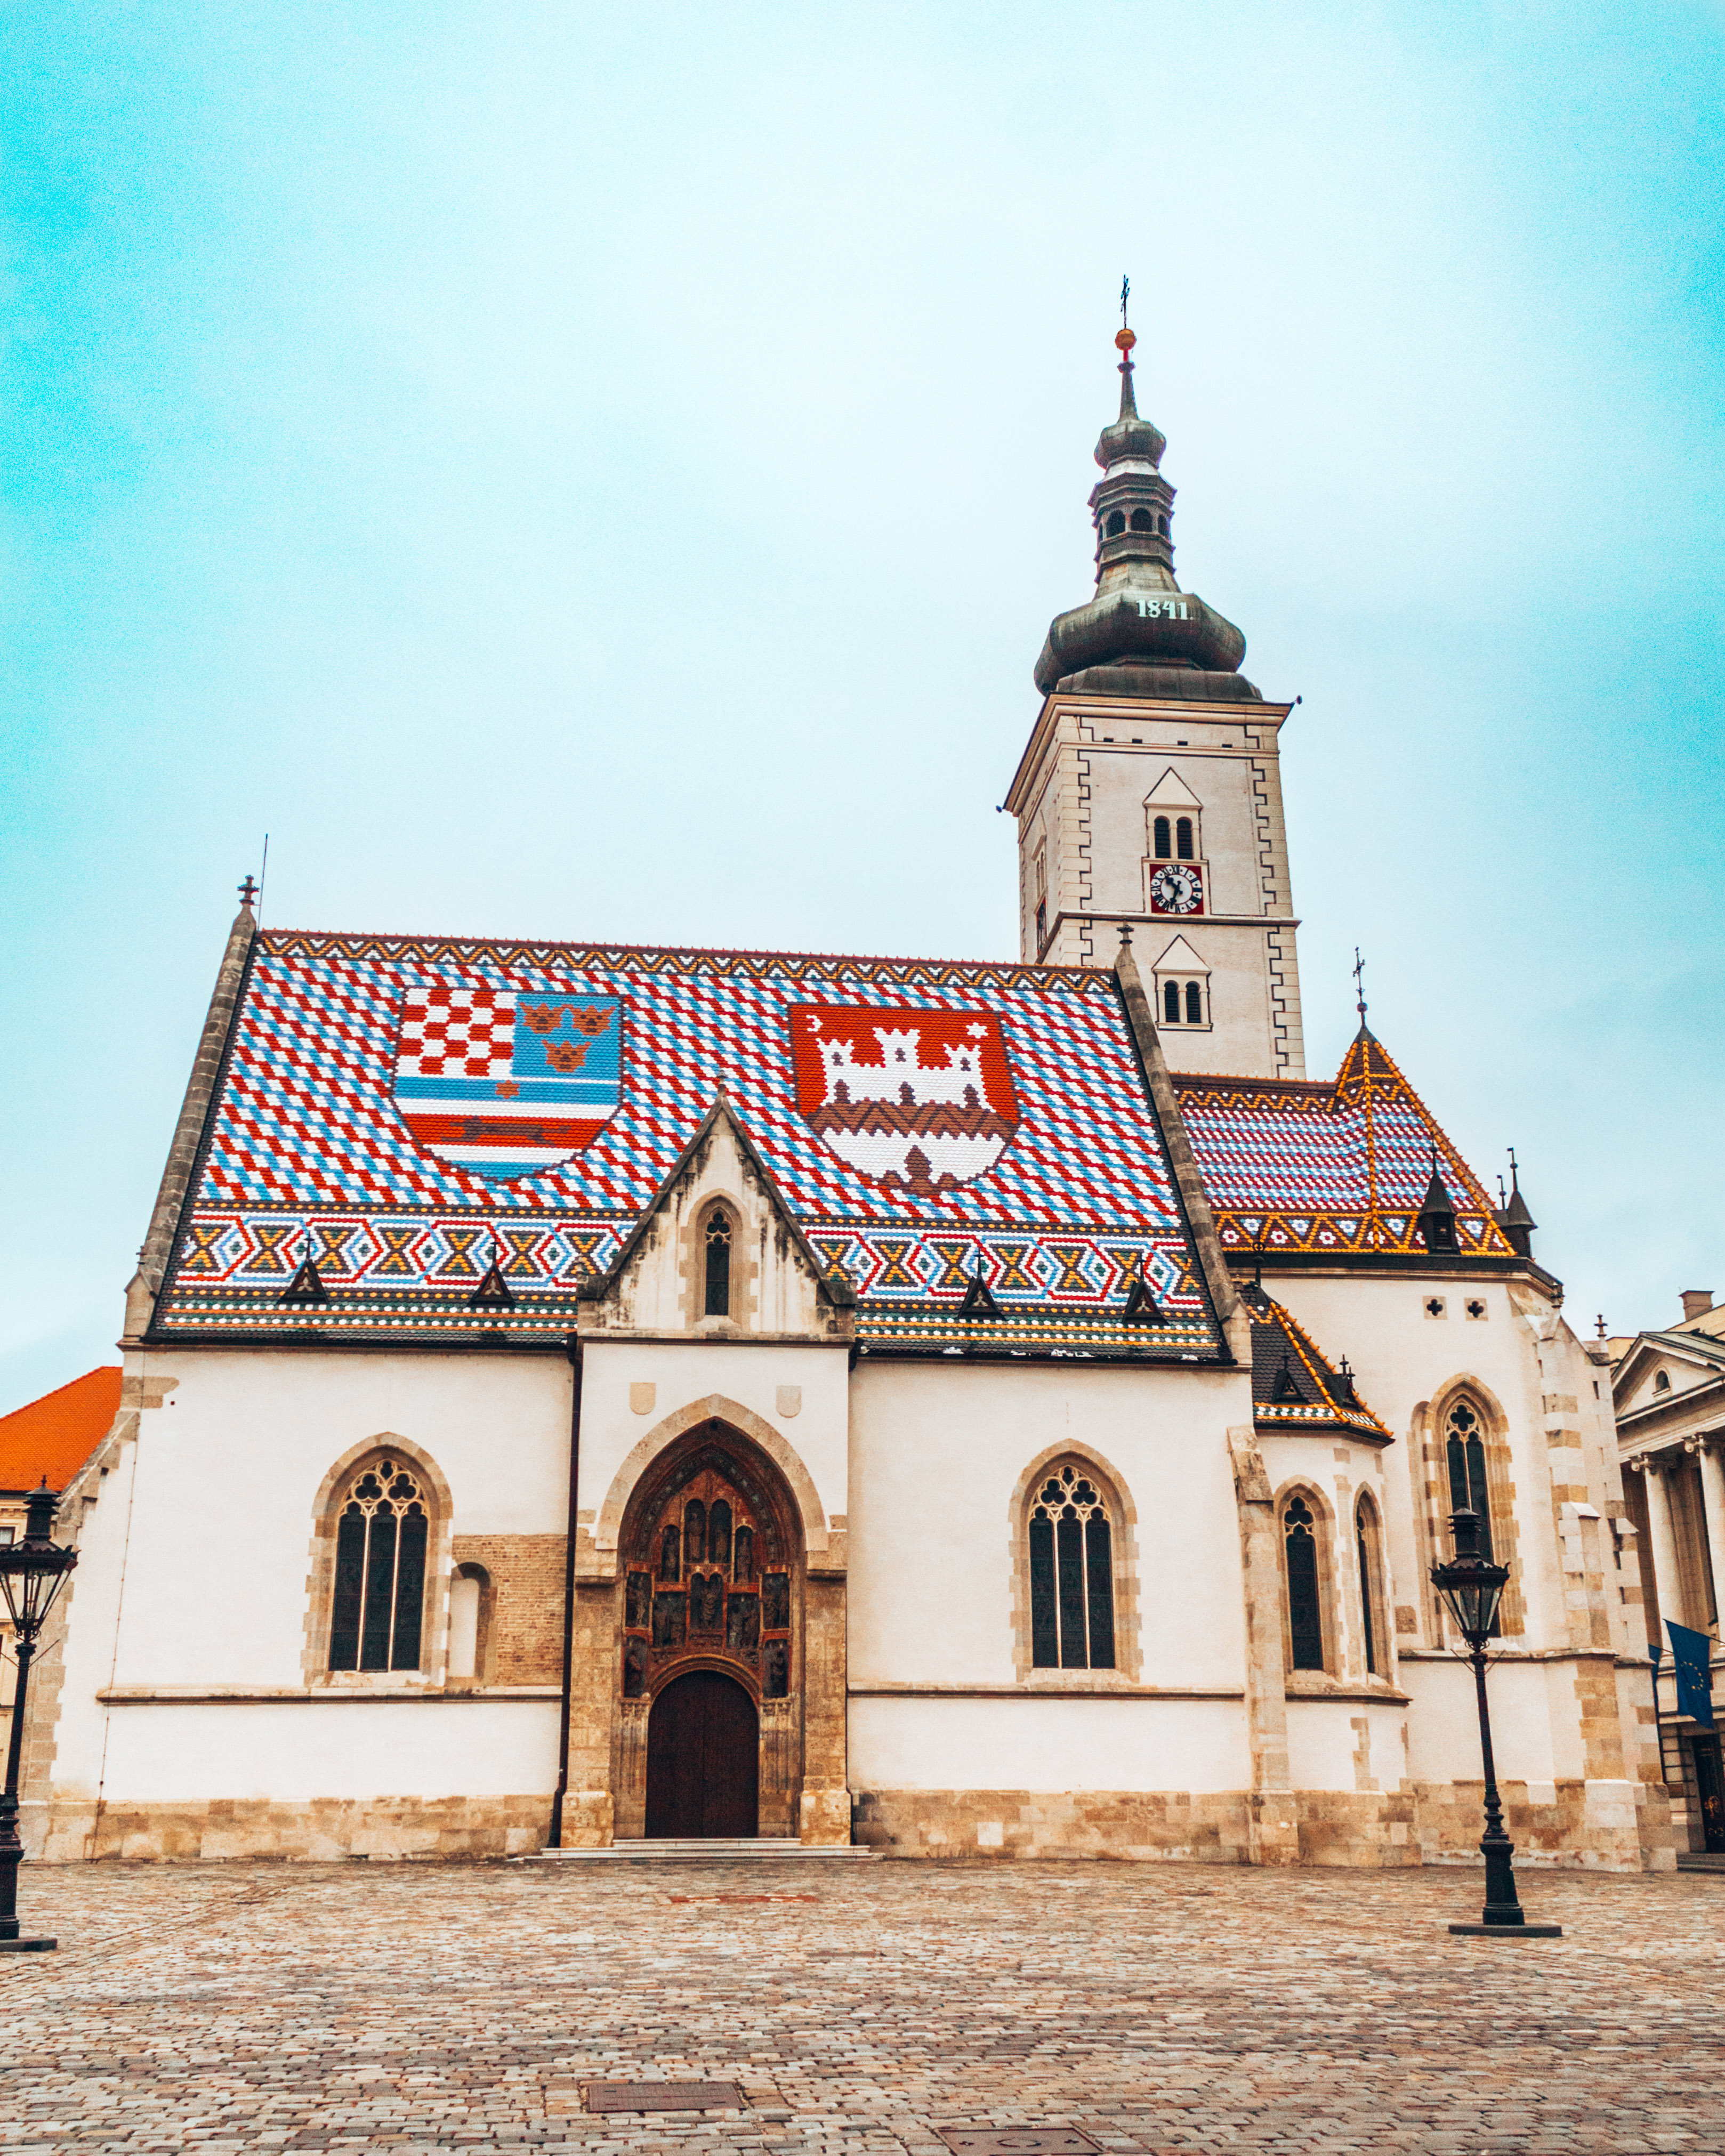 St Marc's Church in Upper Town, one of the best things to do in Zagreb